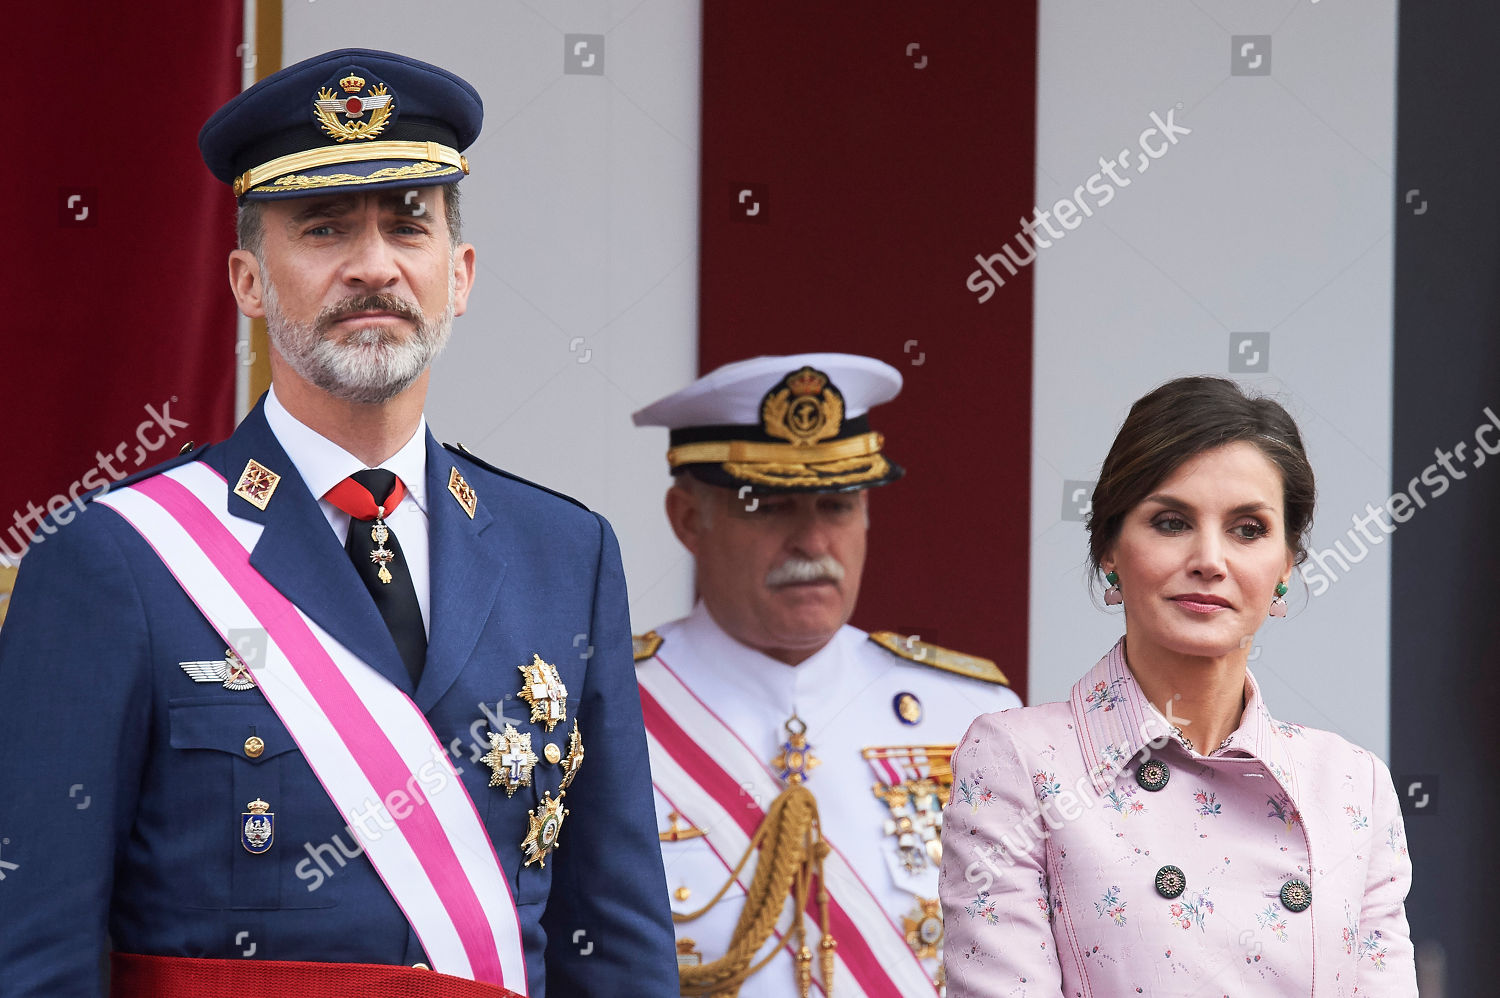 spanish-royals-attend-armed-forces-day-logrono-spain-9694136i-1500.jpg